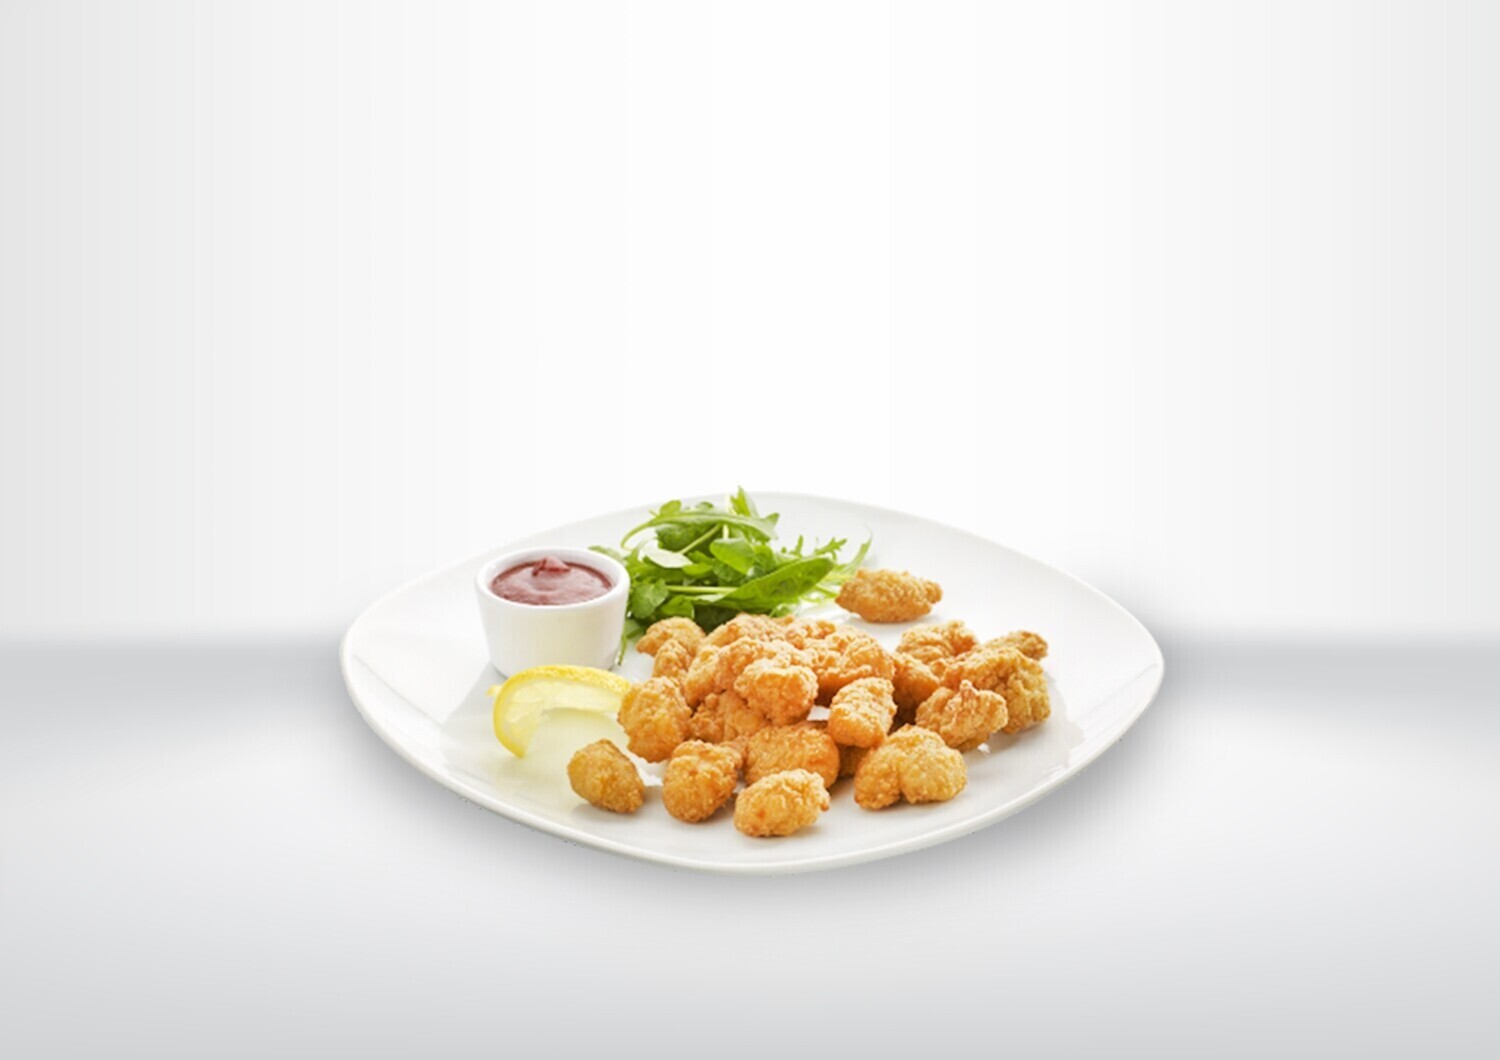 Southern Fried Chicken Popping Bites 1x1kg